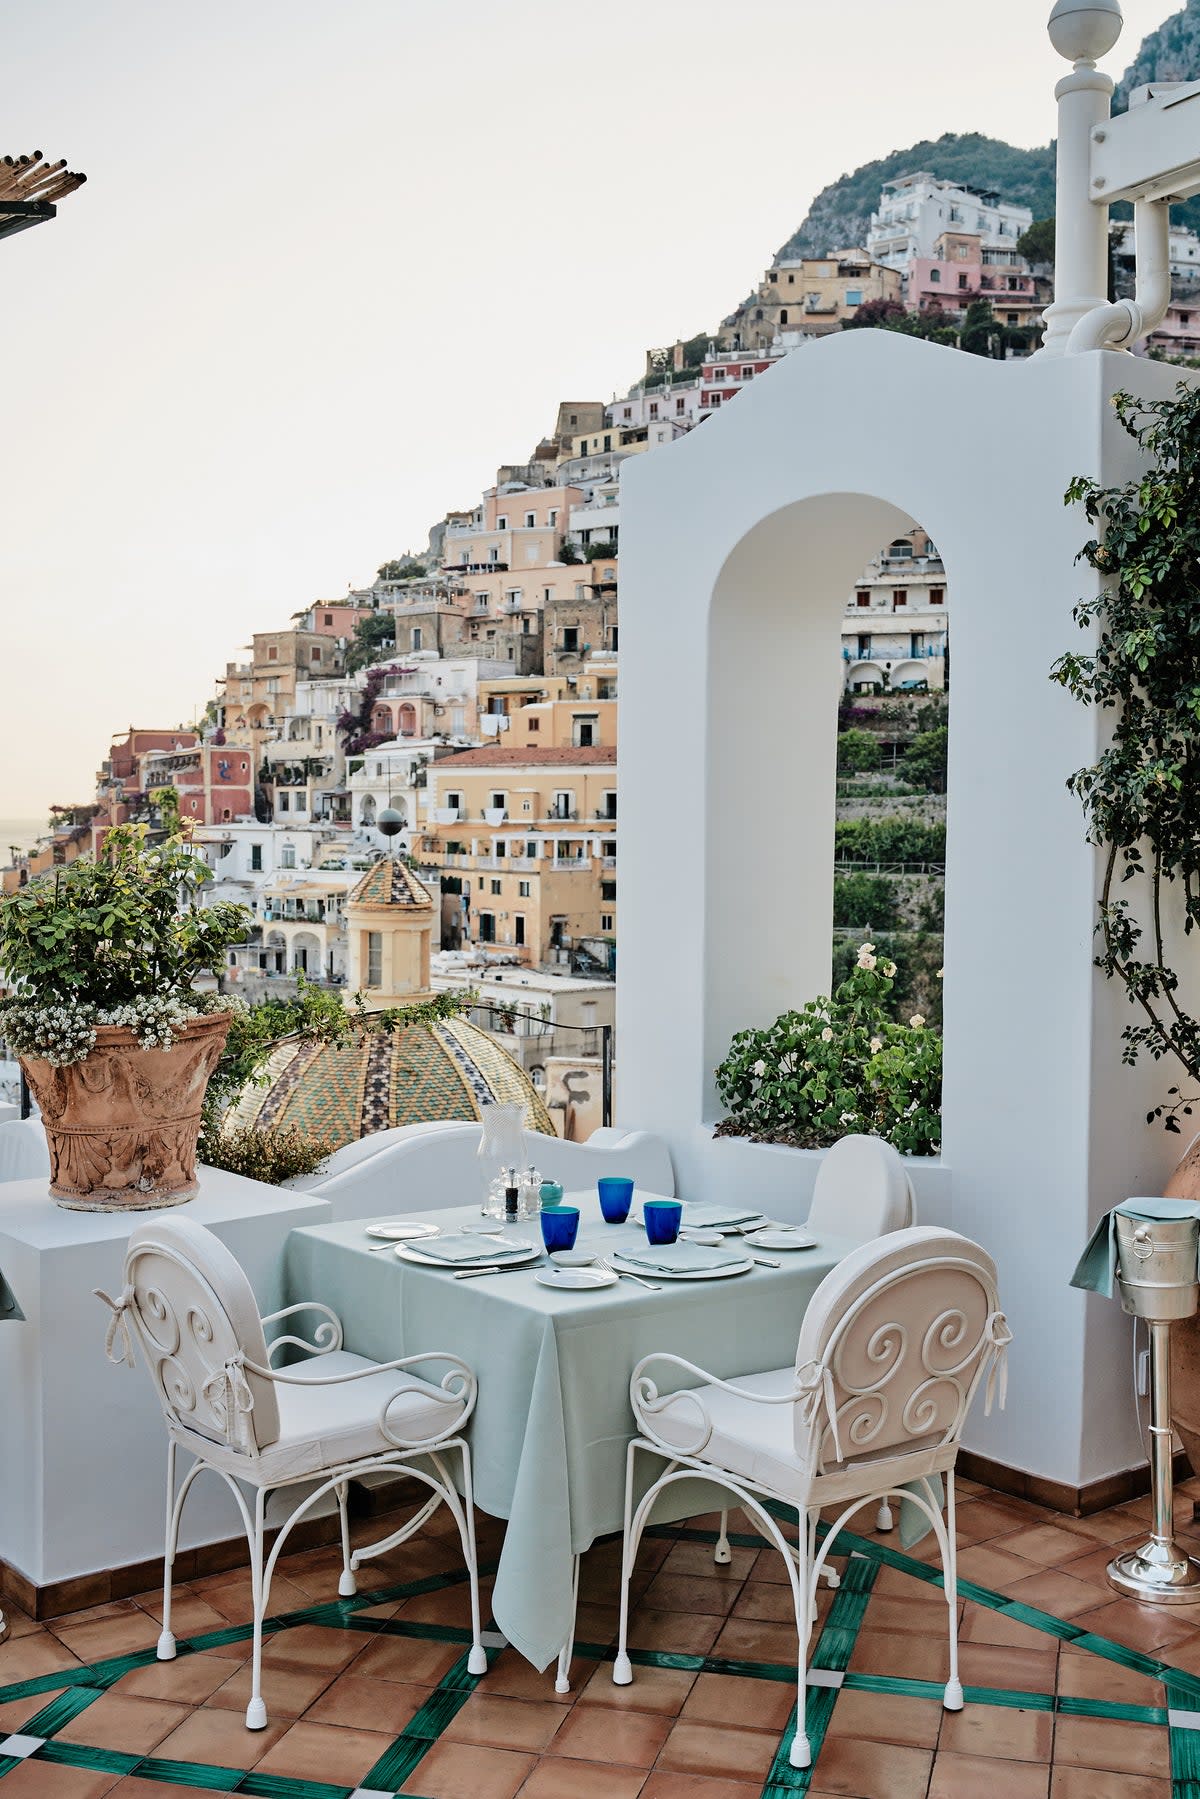 Sweeping views of Positano’s colourful cliffside from the terrace (Courtesy of Le Sirenuse Photographer/Credit Brechenmacher & Baumann)